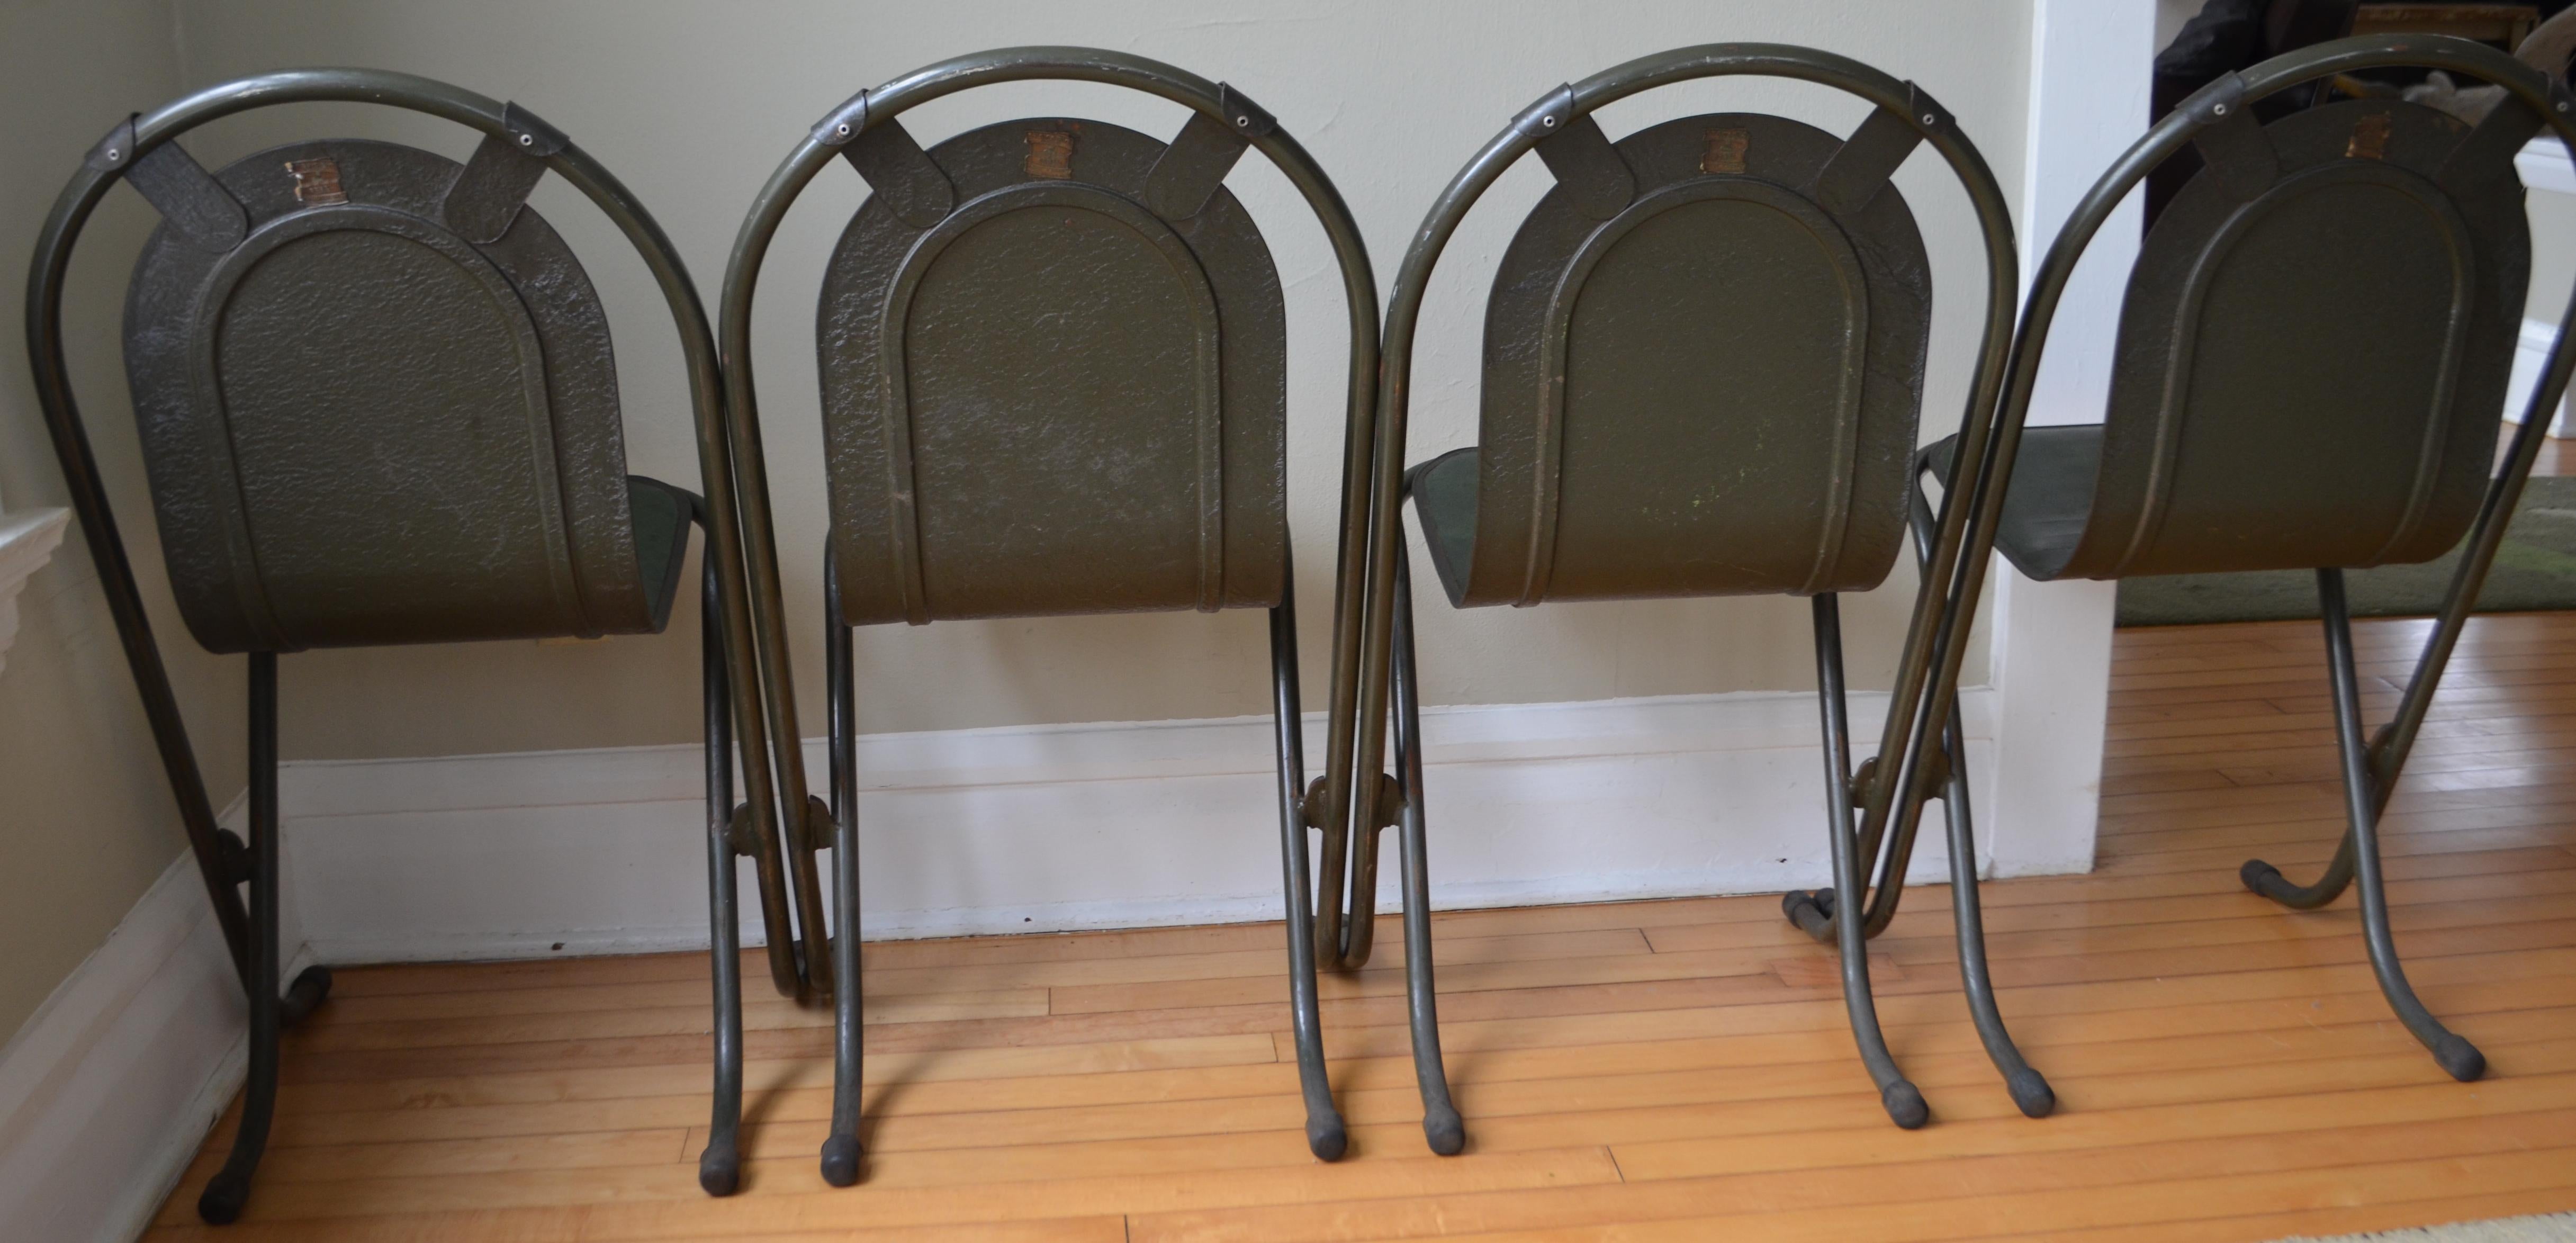 Stacking Chairs by Sebel, Pressed Metal Seat on Tubular Frame, Set of 4 For Sale 2